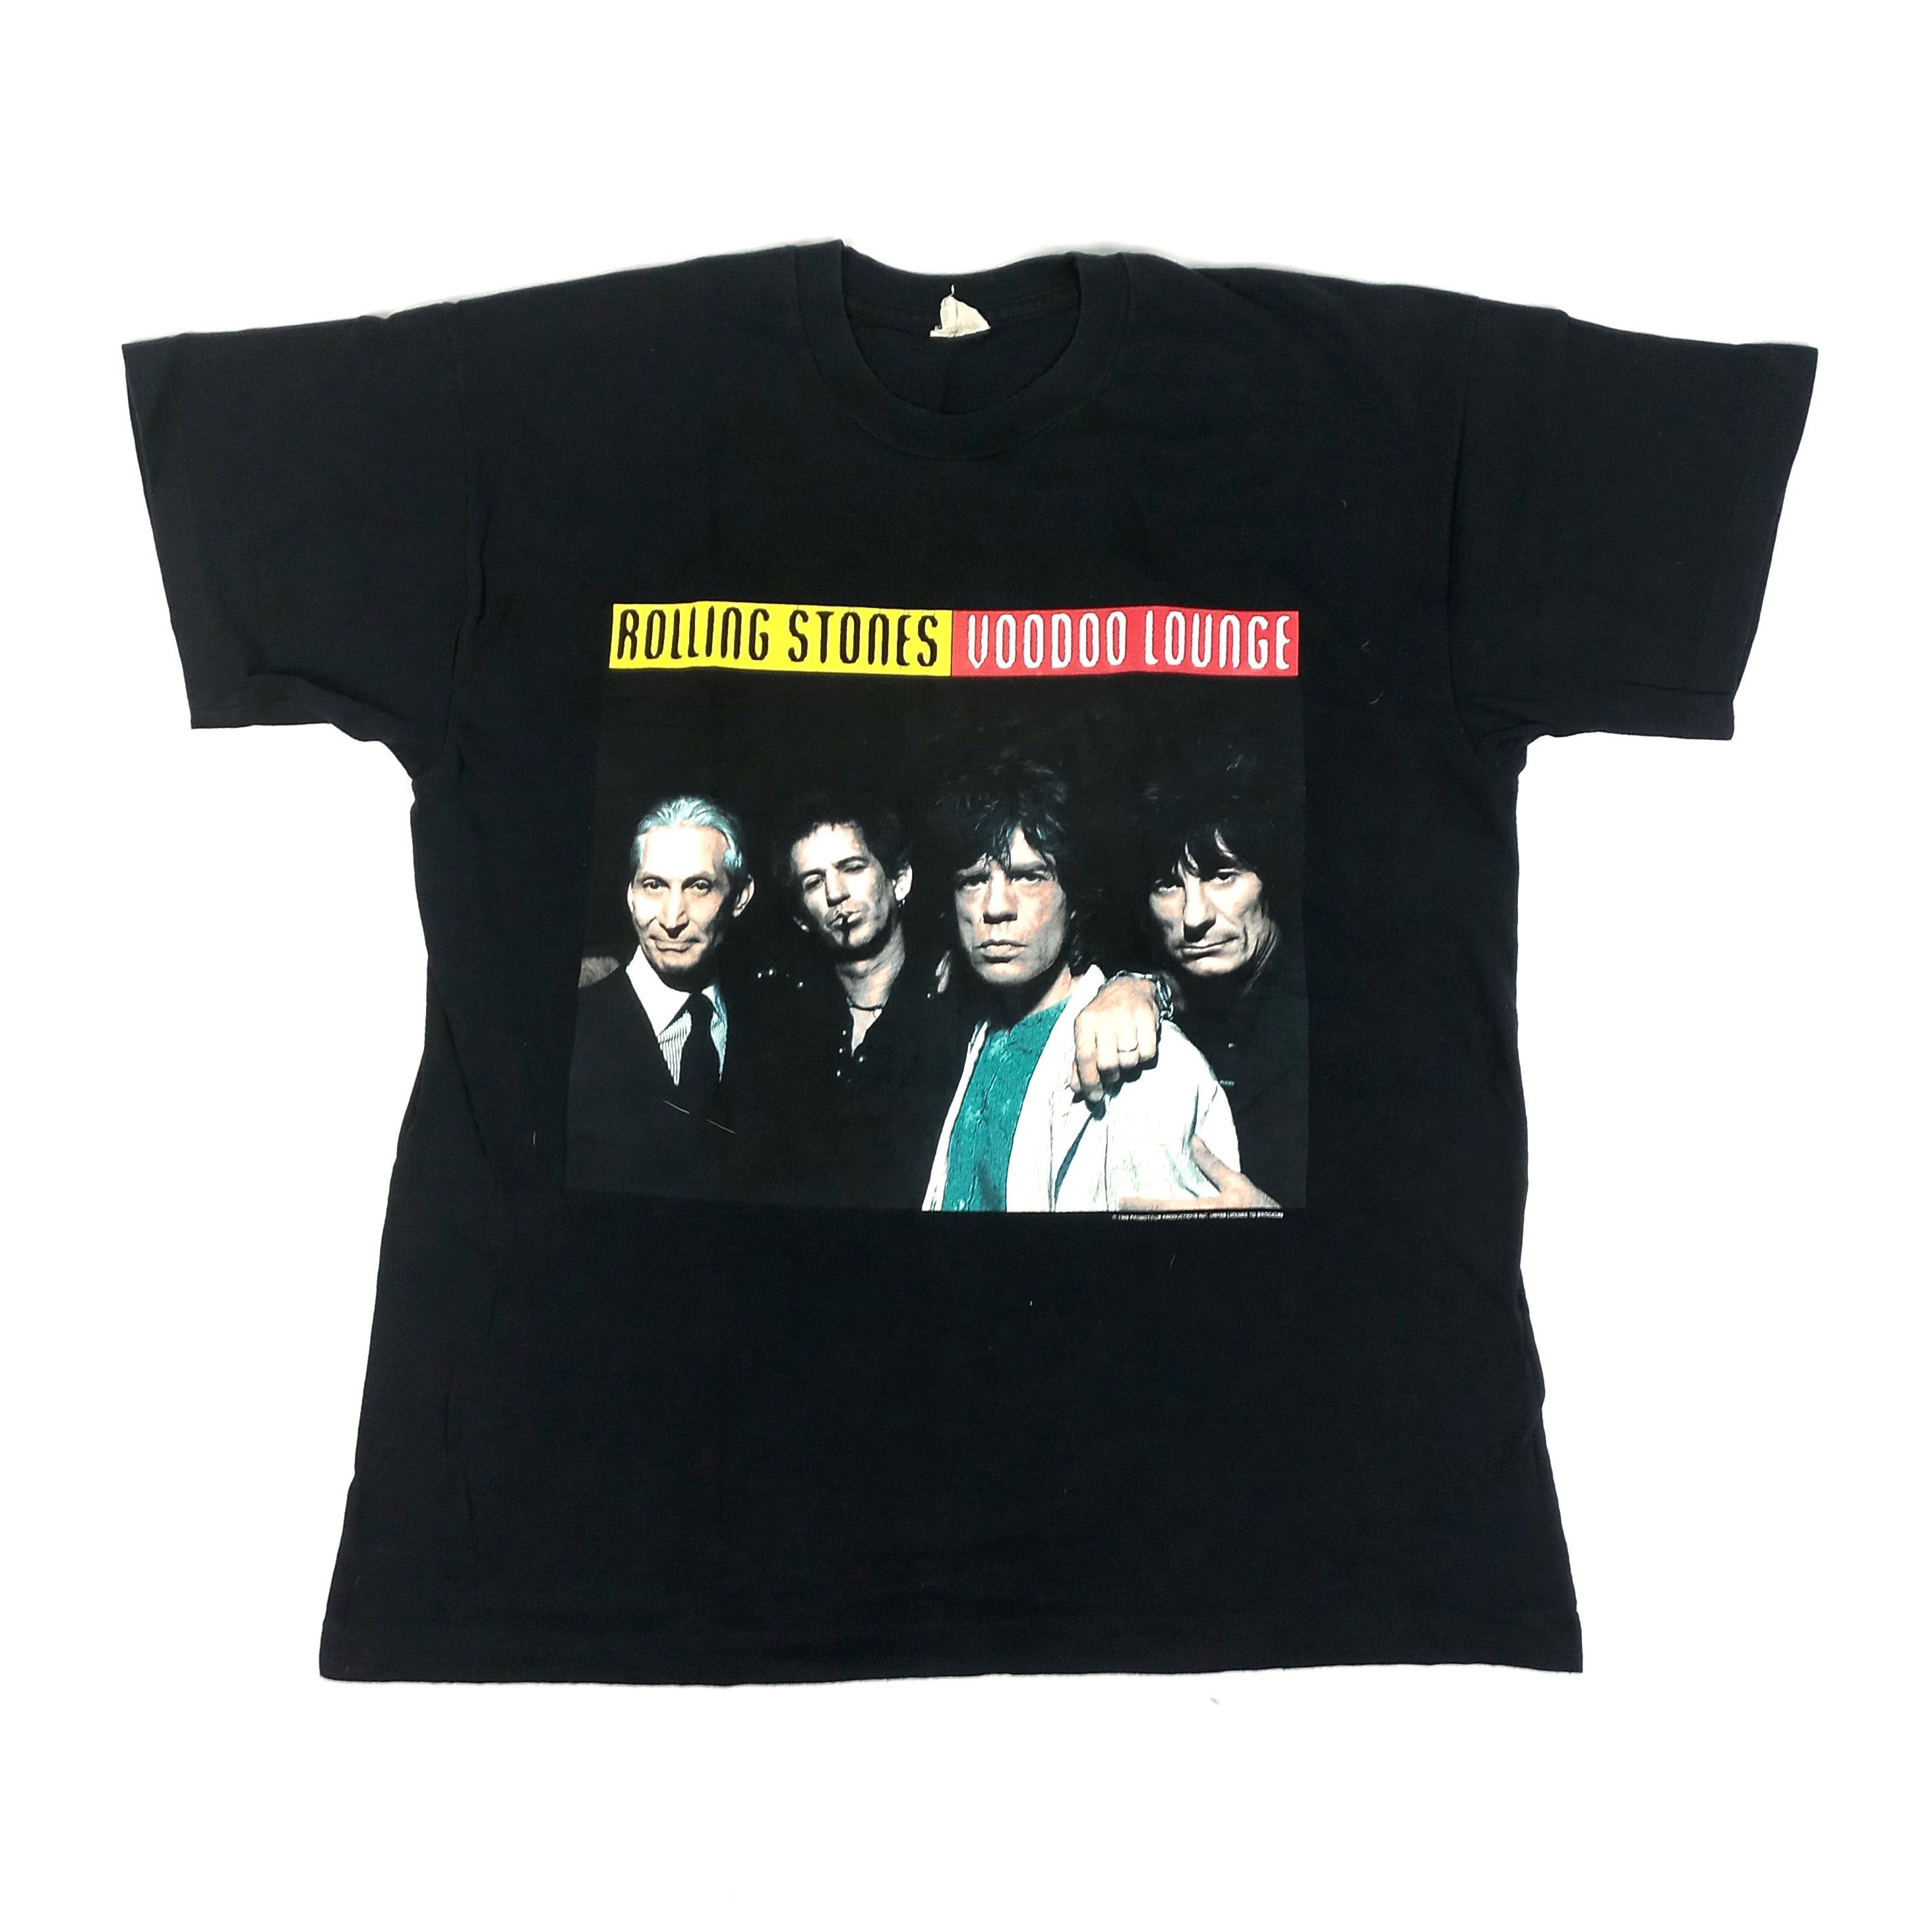 Pre-owned Band Tees X The Rolling Stones Vintage T-shirt 1995 In Black